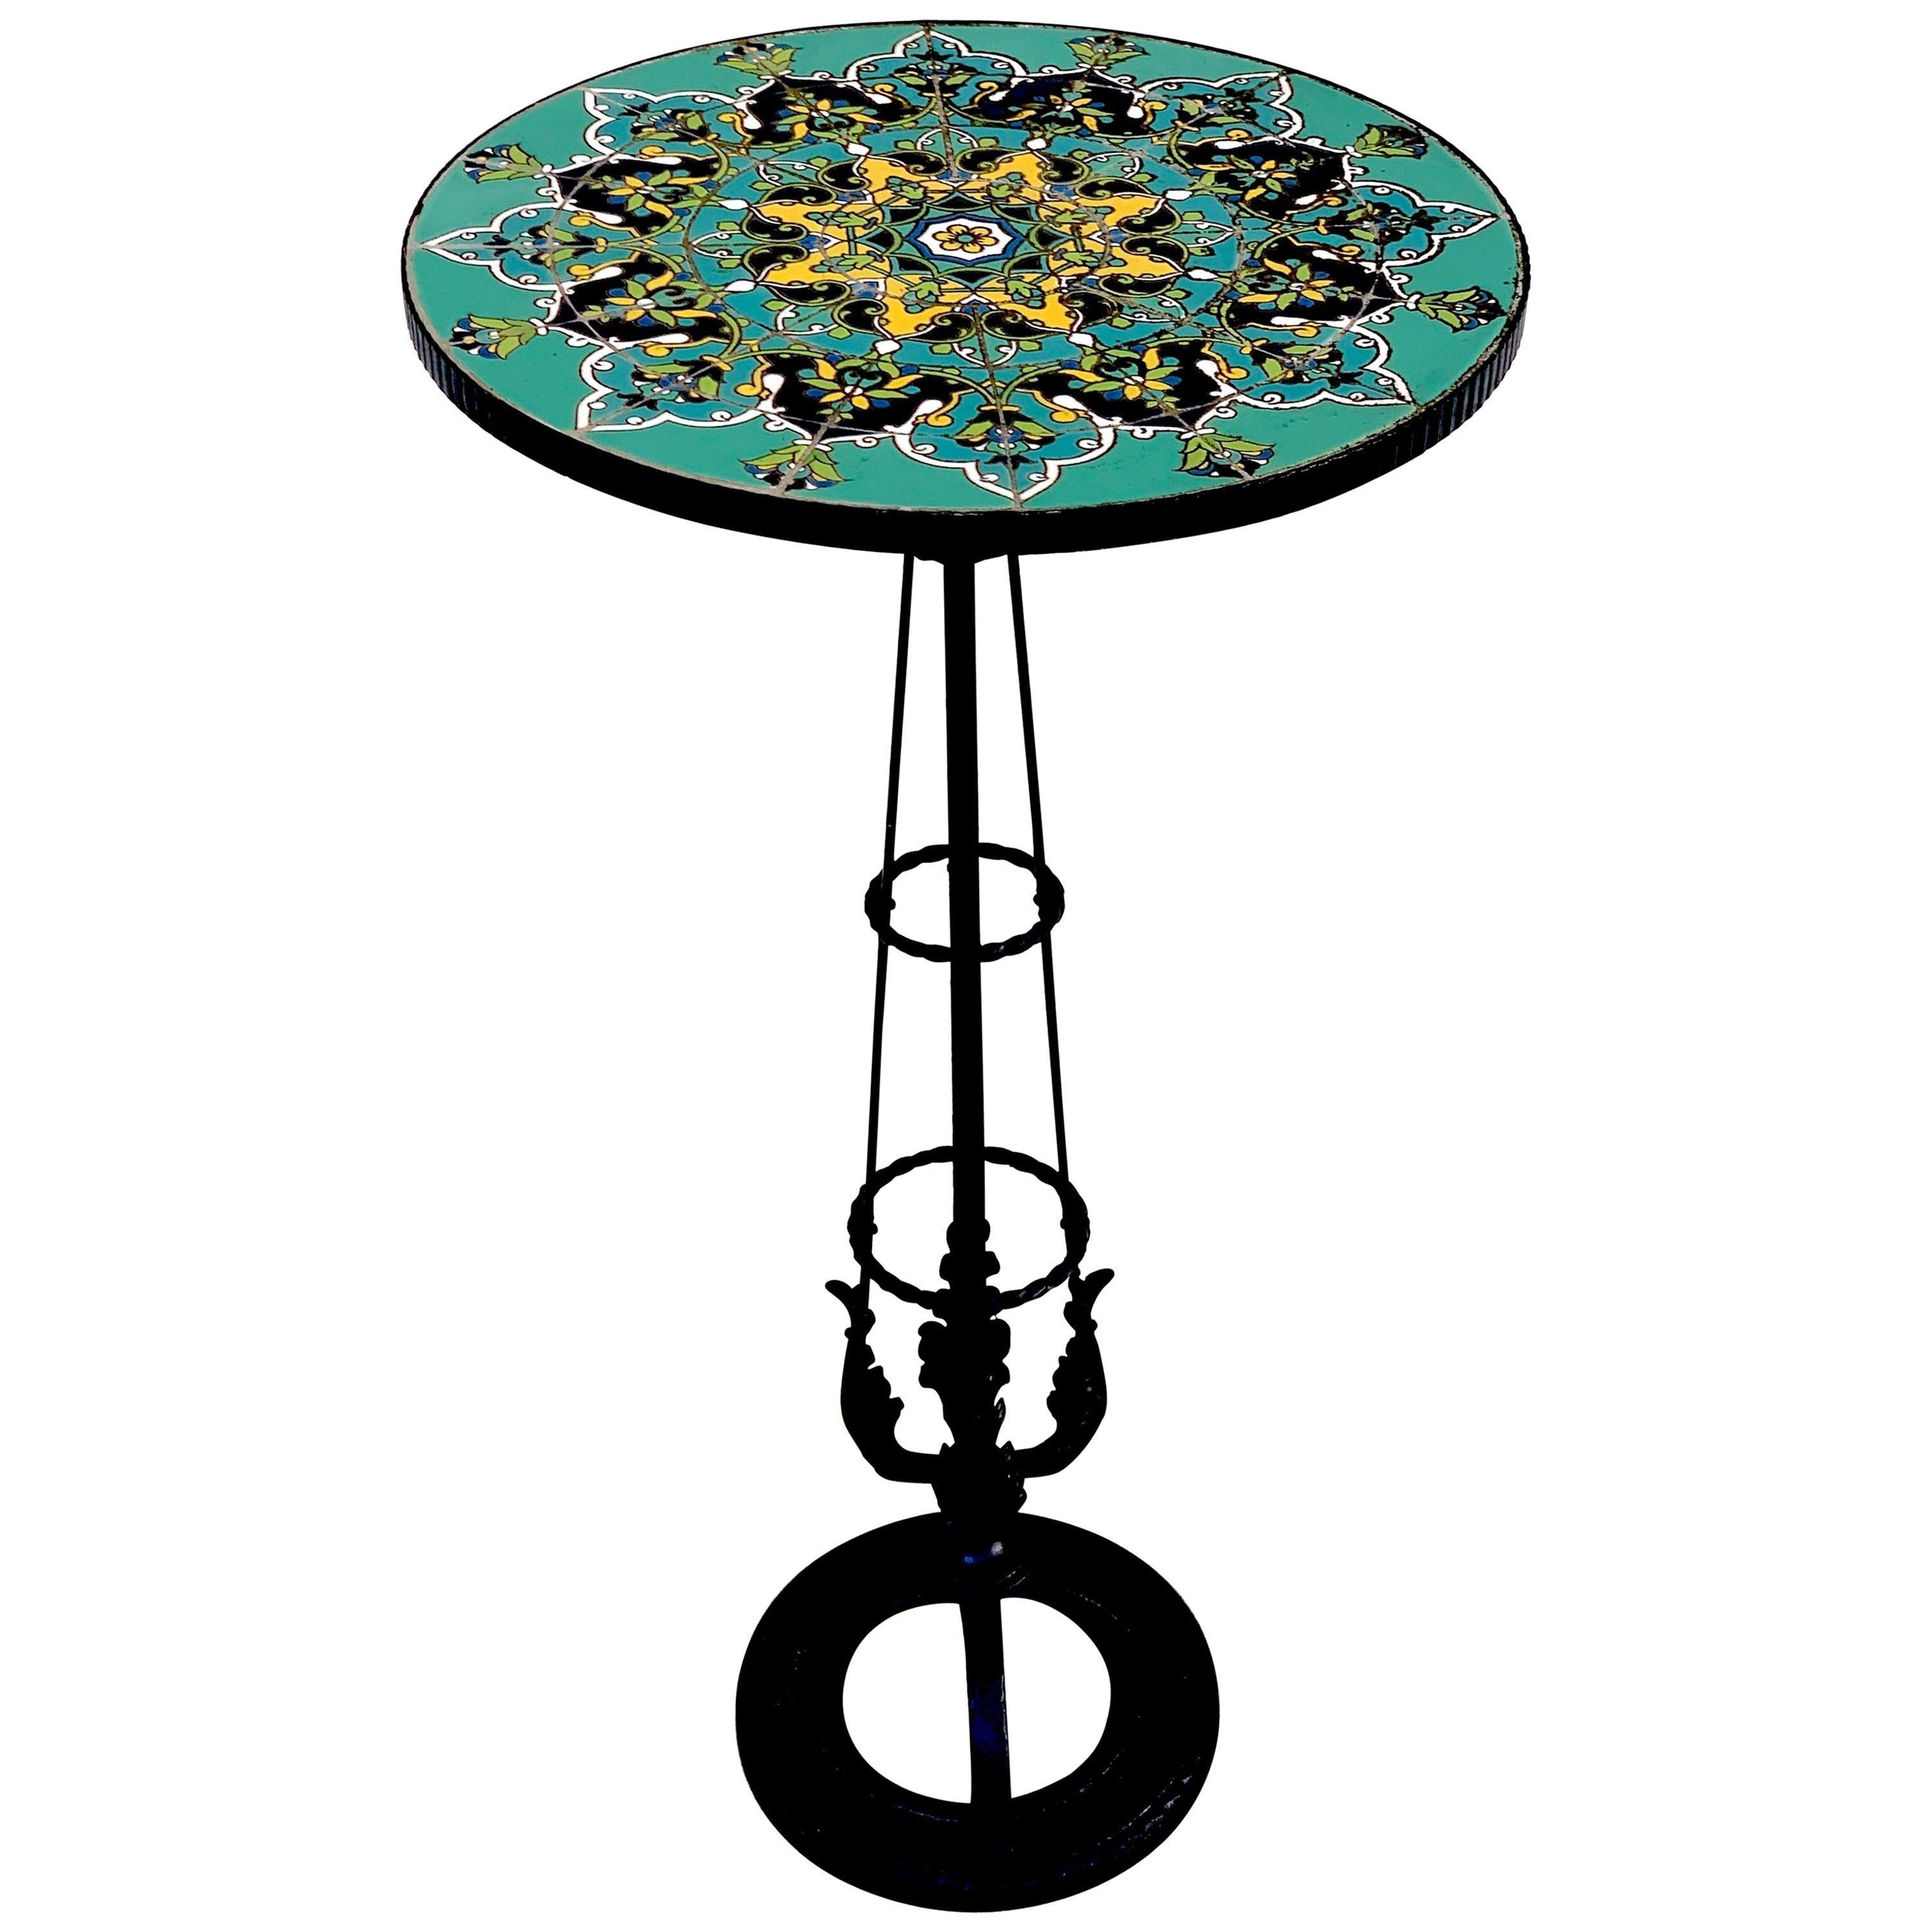 French Art Deco Turquoise Tile and Wrought Iron Pedestal Table